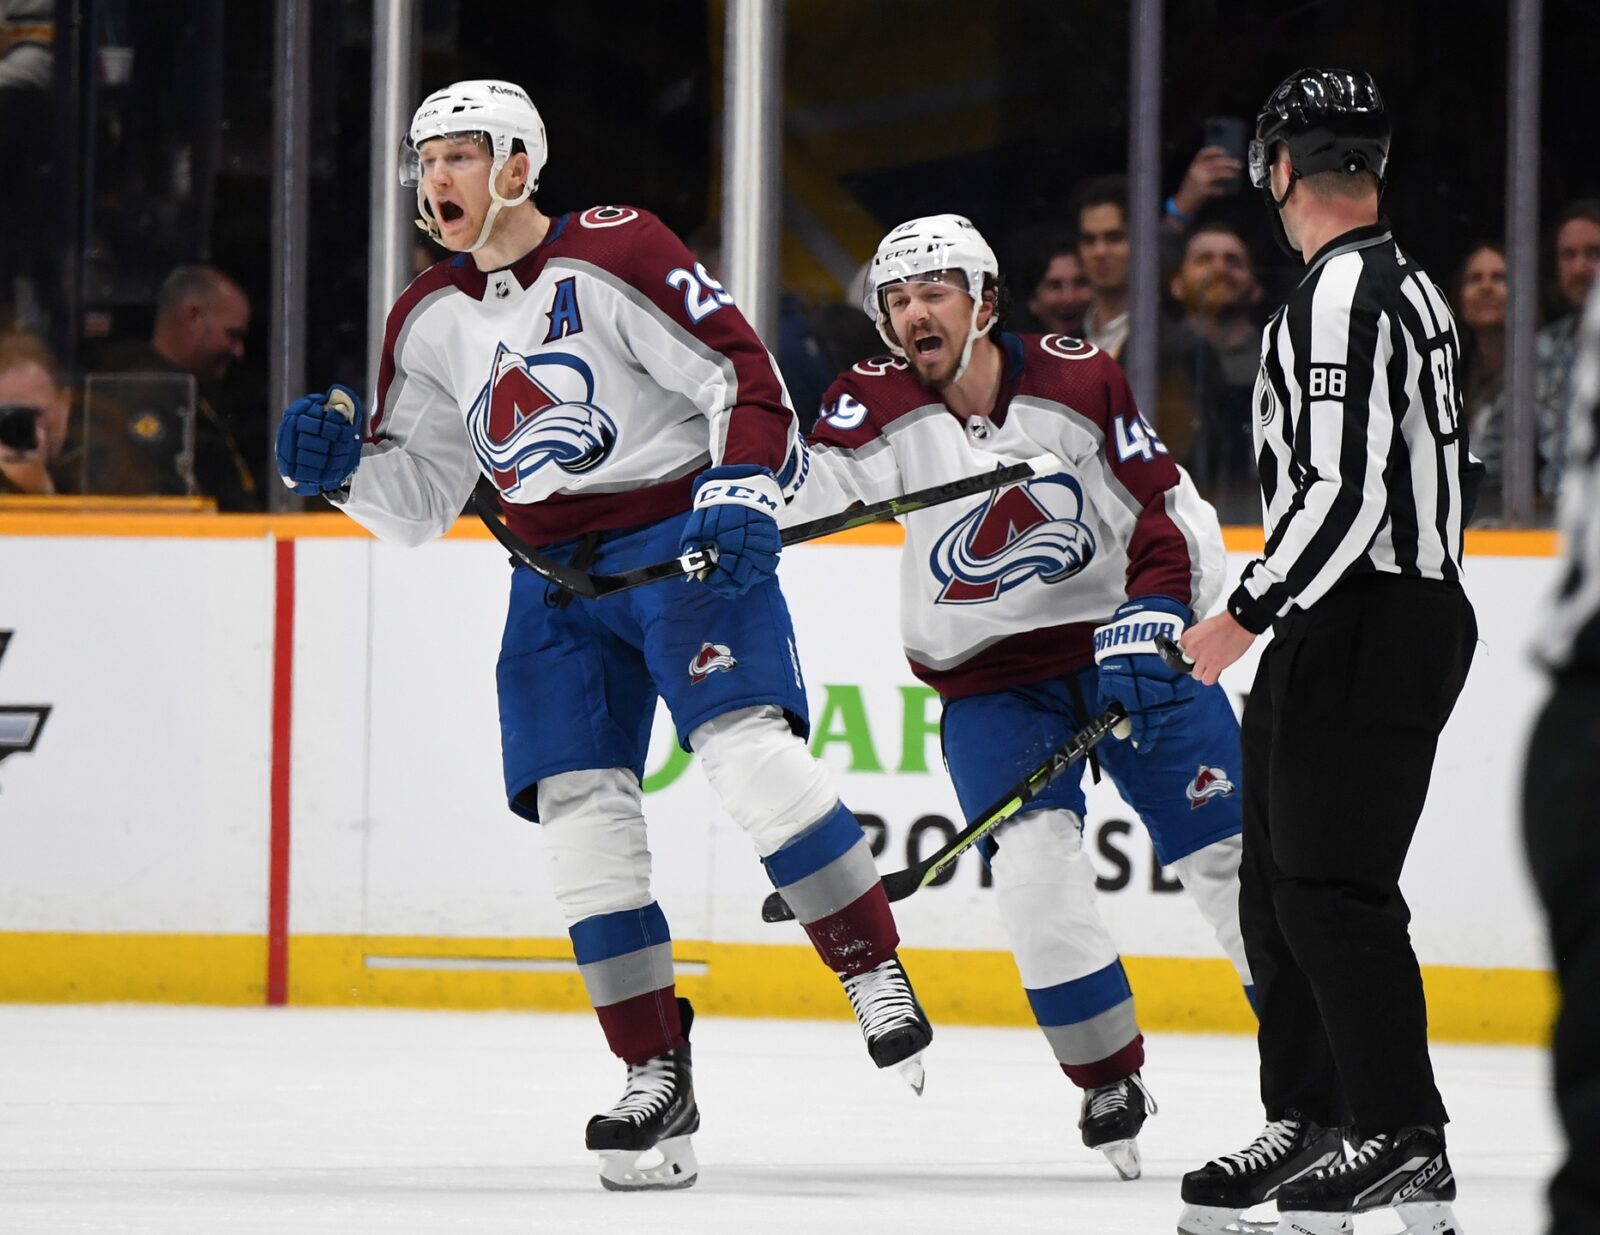 Colorado Avalanche: Home Ice Advantage is Real with this Team